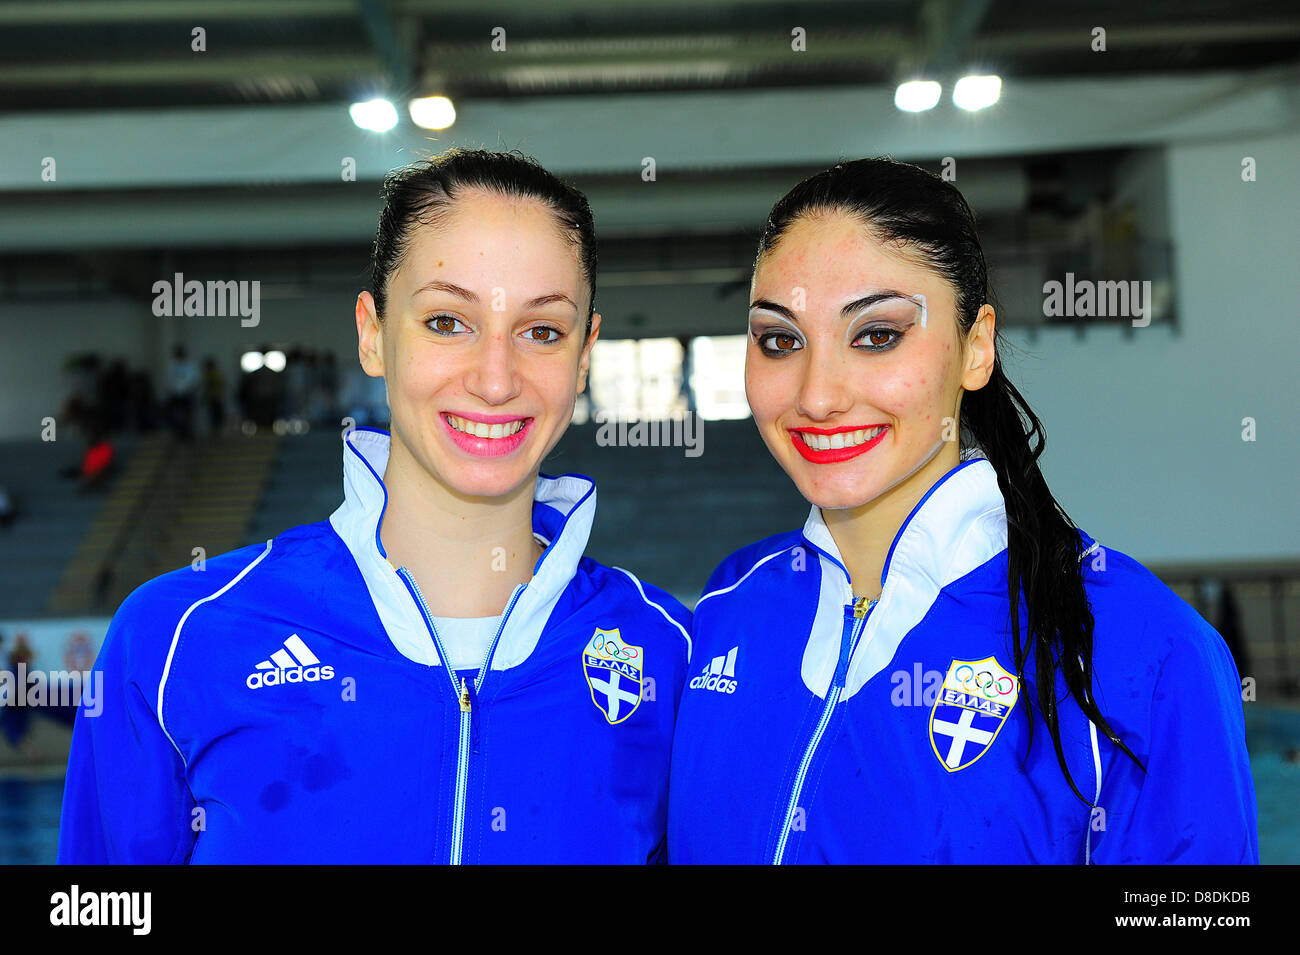 Savona, Italy. 26th May, 2013. The team from Greece (Solomou-Platanioti) is  fourth at the European Synchronised Swimming Champions Cup from the Piscina  Comunale Carlo Zanelli. Credit: Action Plus Sports Images/Alamy Live News